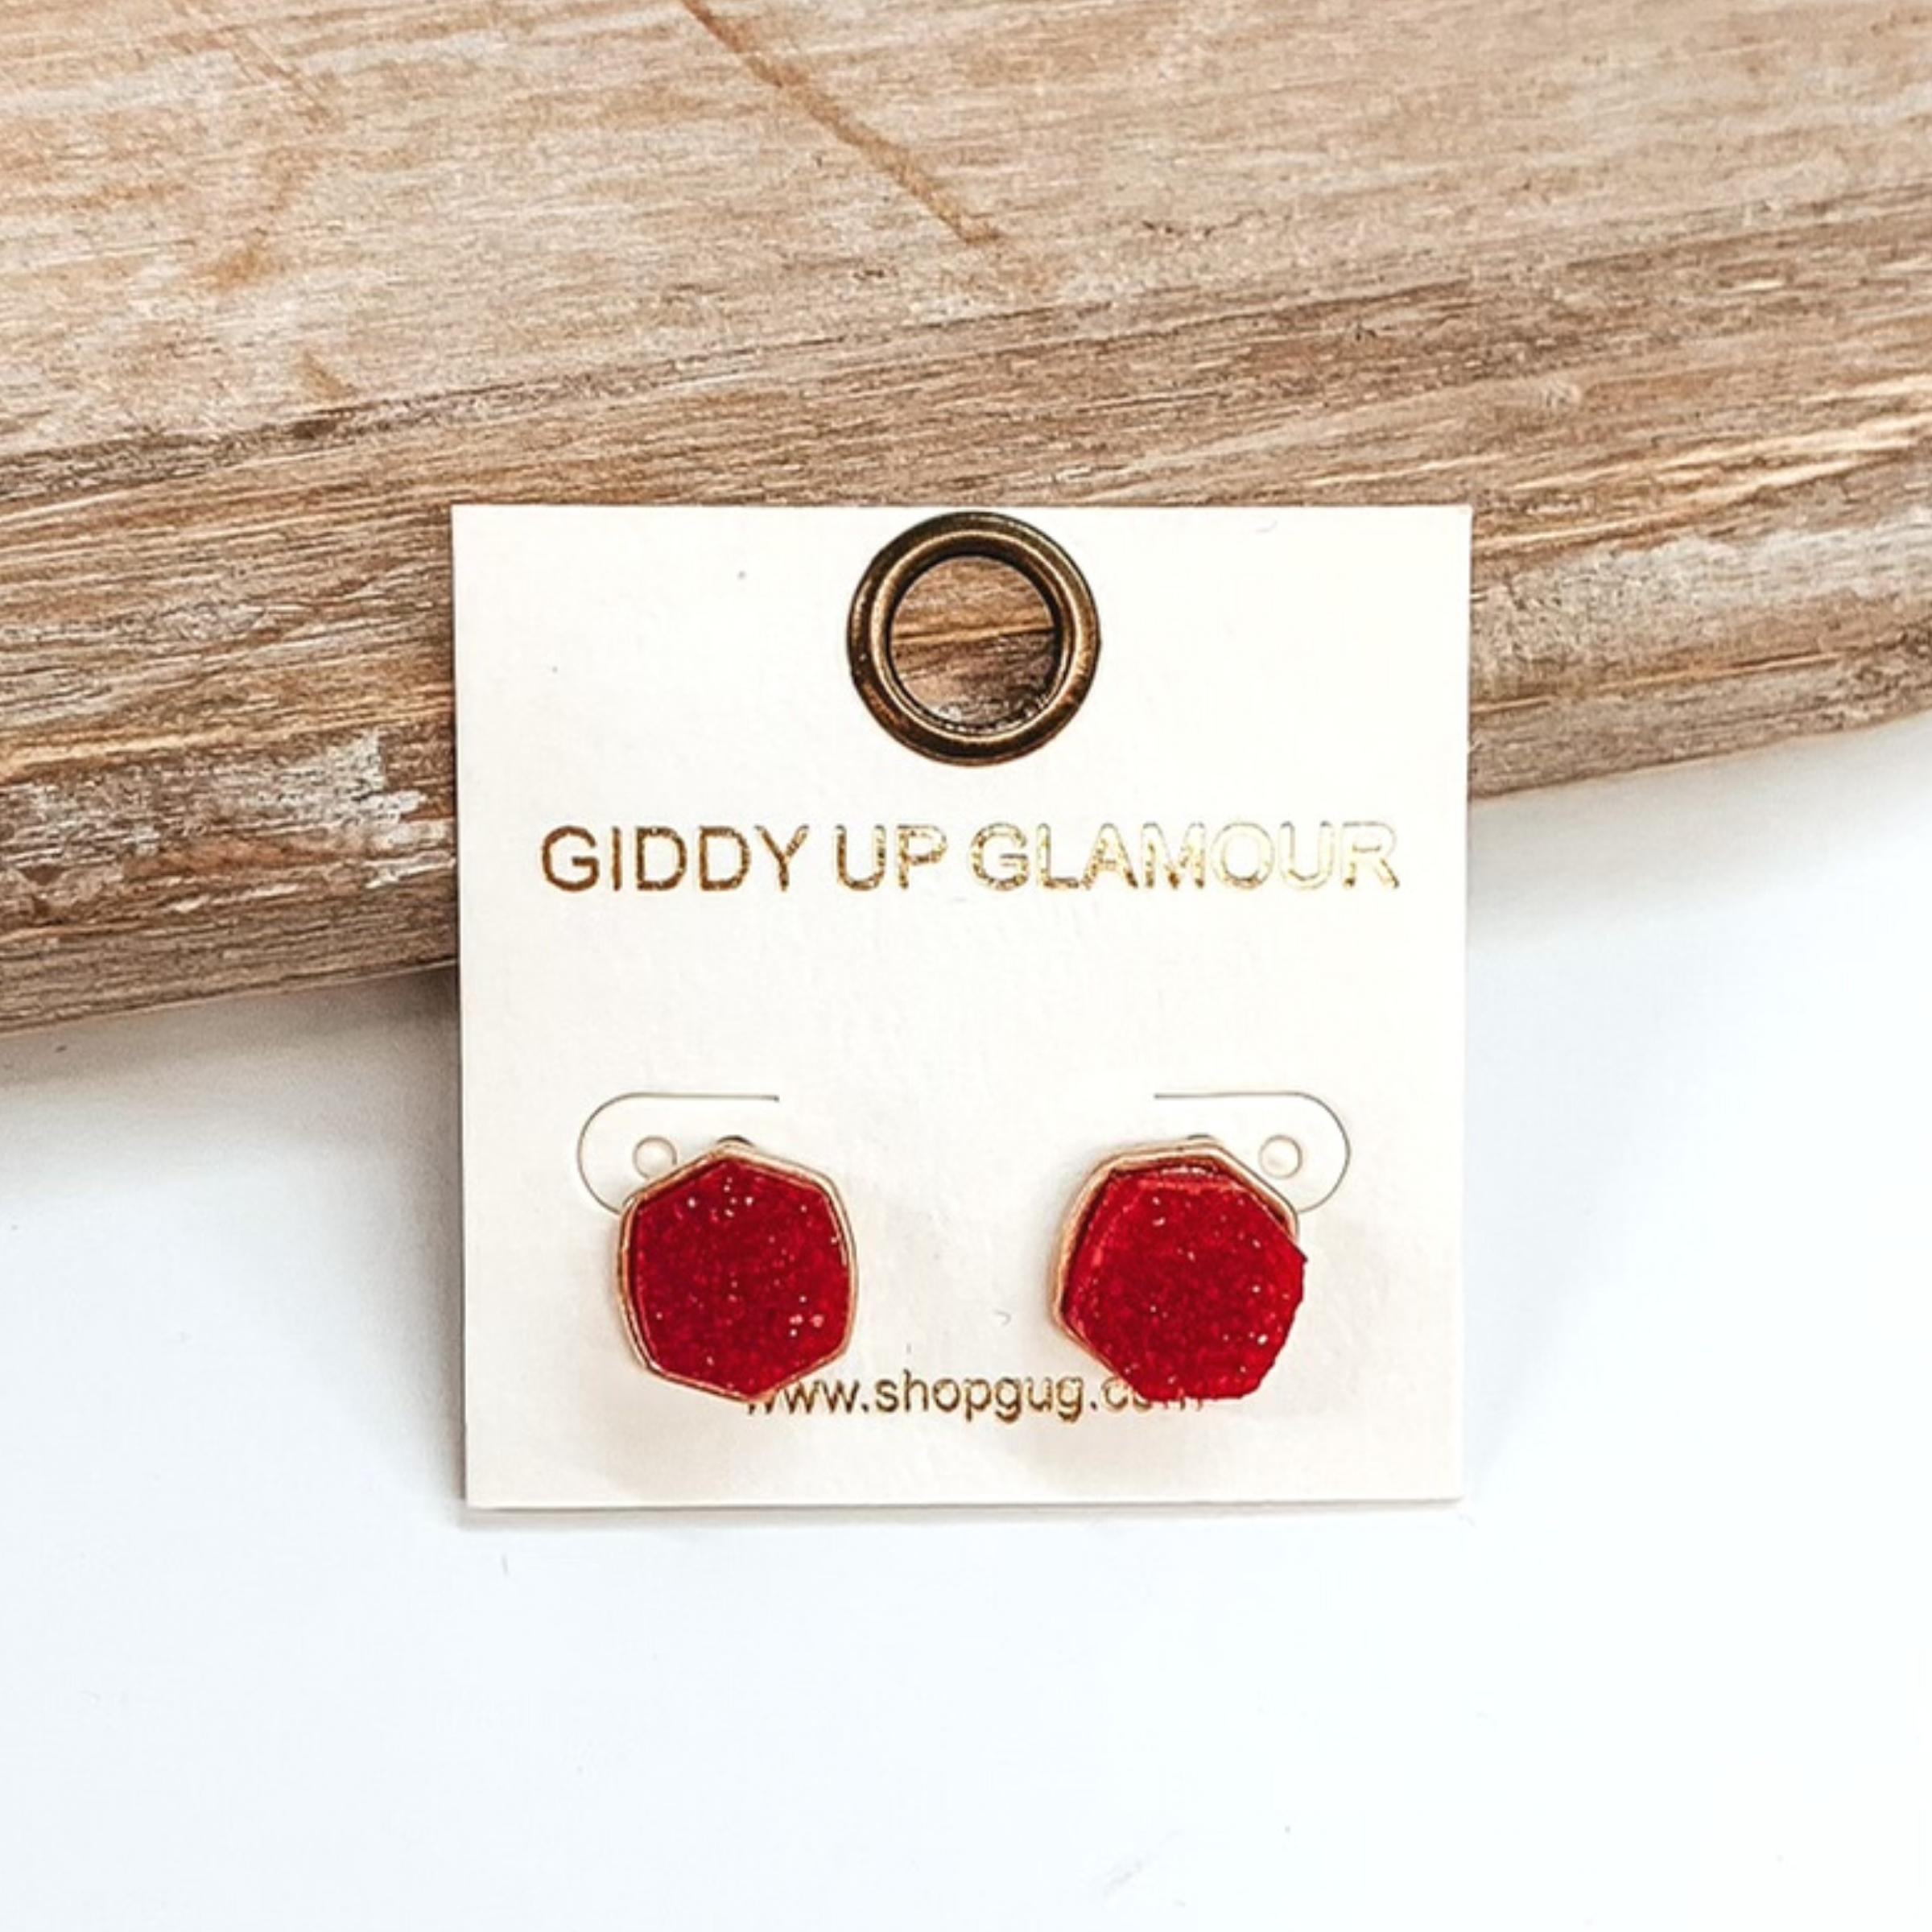 Gold post back earrings with druzy, red, hexagon shaped stone. These earrings are pictured on a white earrings holder on a white background, leaning against a tan block.